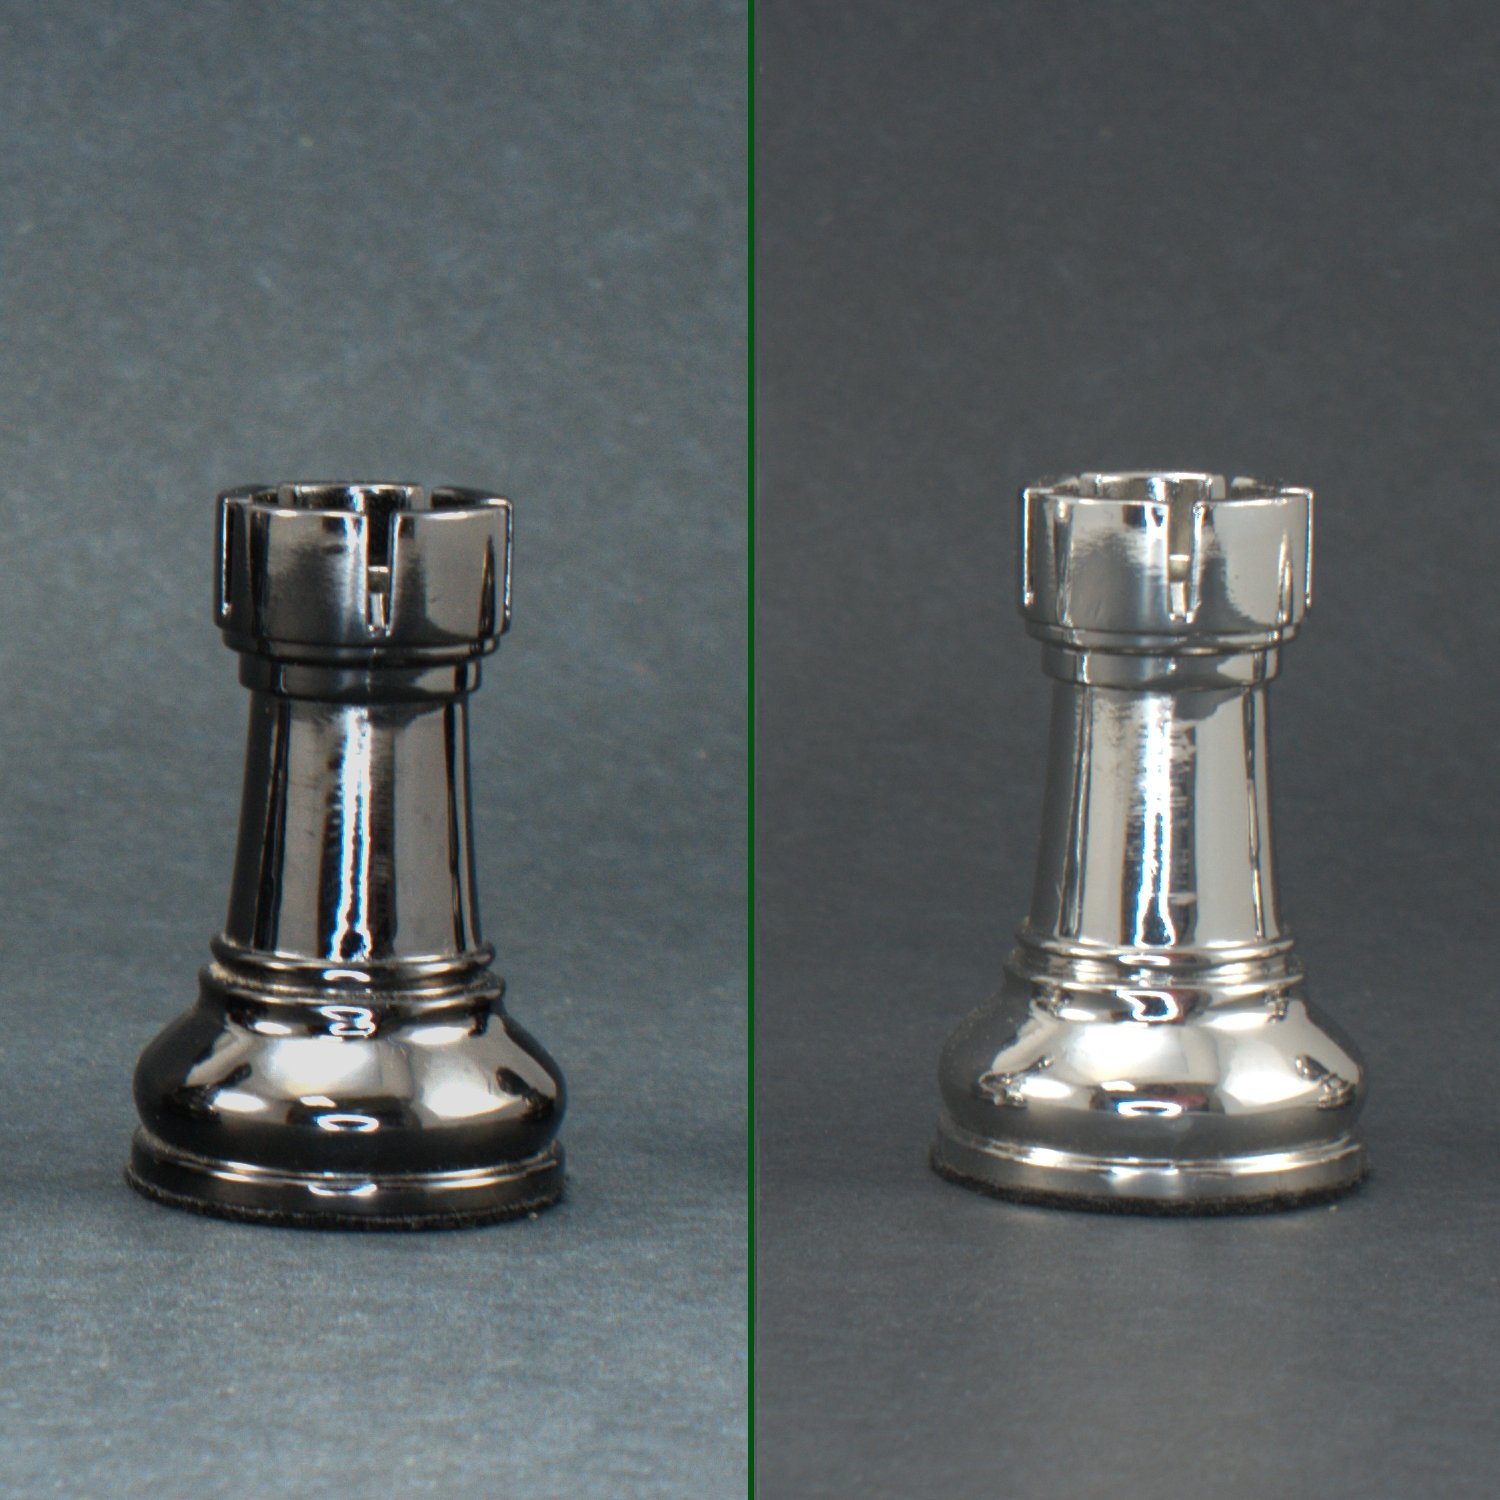 Metal Puzzle Chess Piece - King